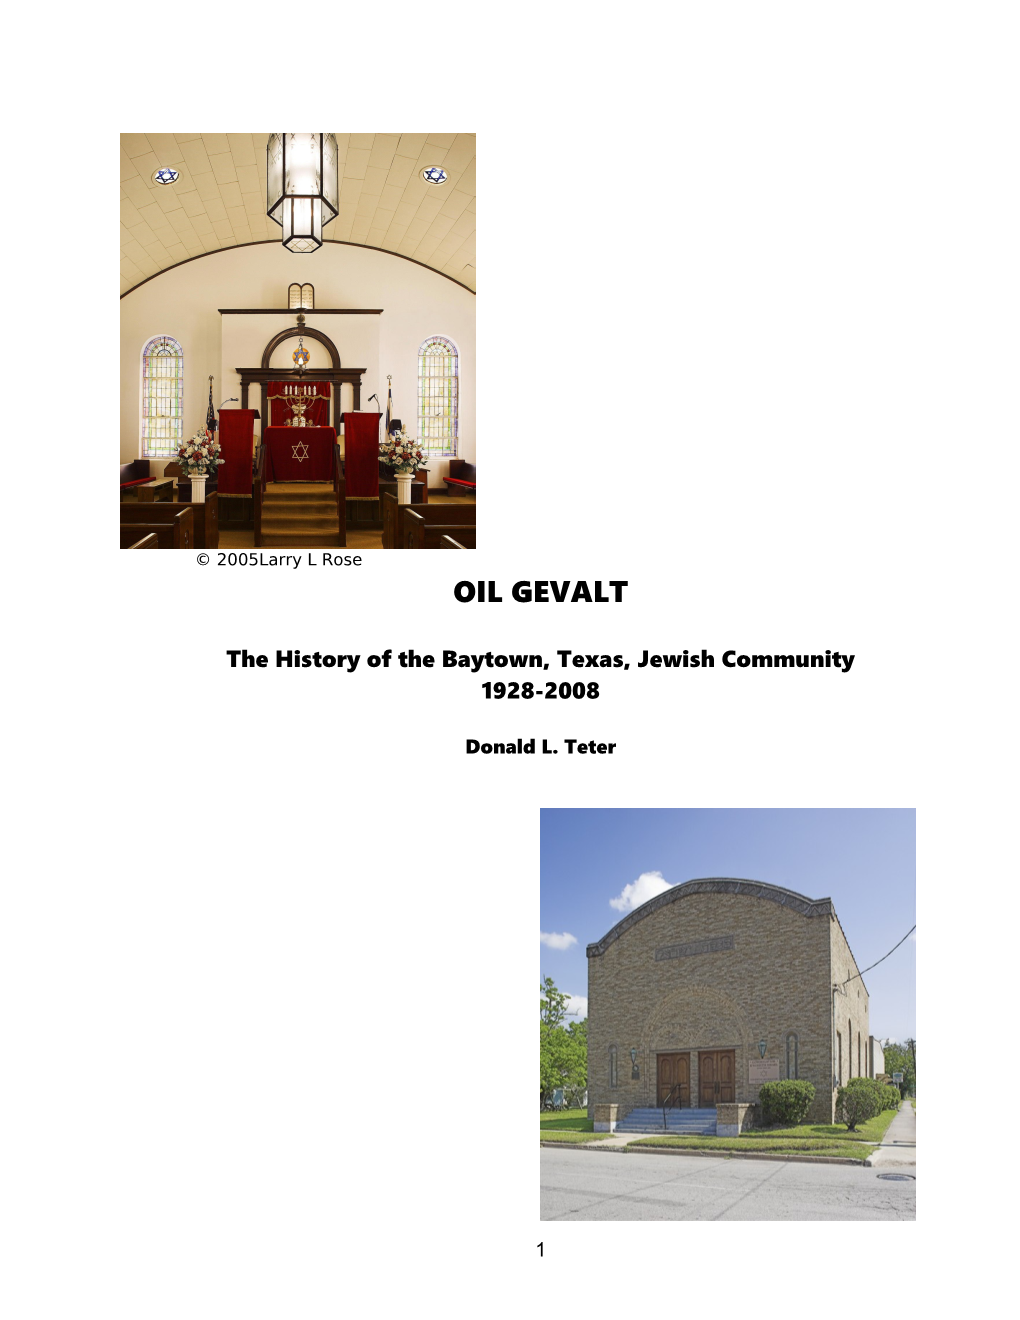 The Jewish History in Baytown, Texas, Closely Parallels That of the City Itself